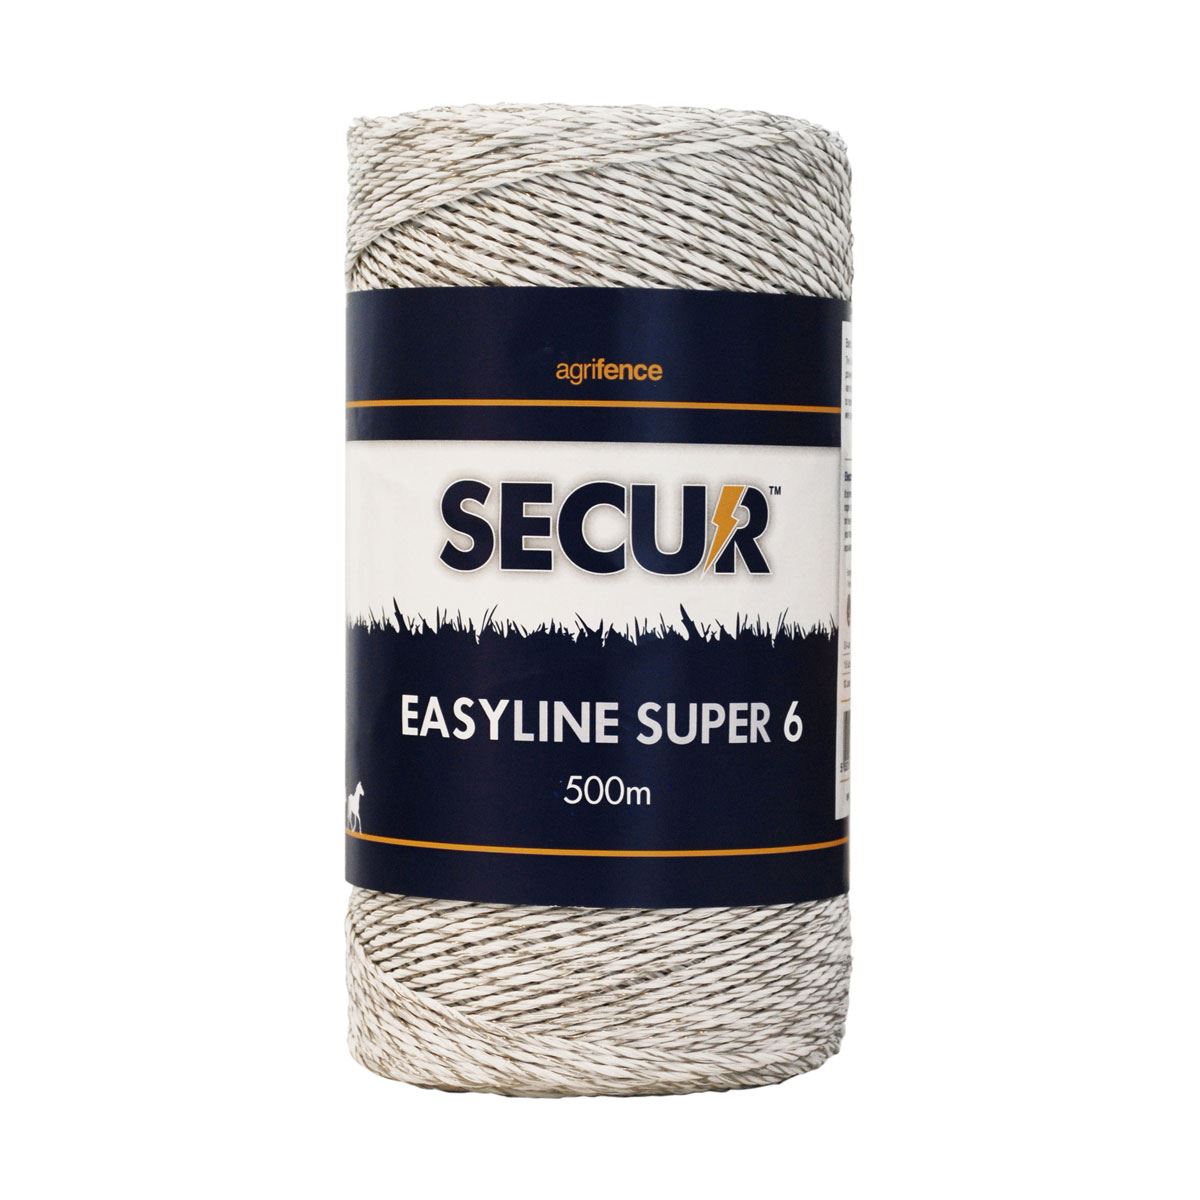 Agrifence Easyline SUPER 6 Polywire - Just Horse Riders